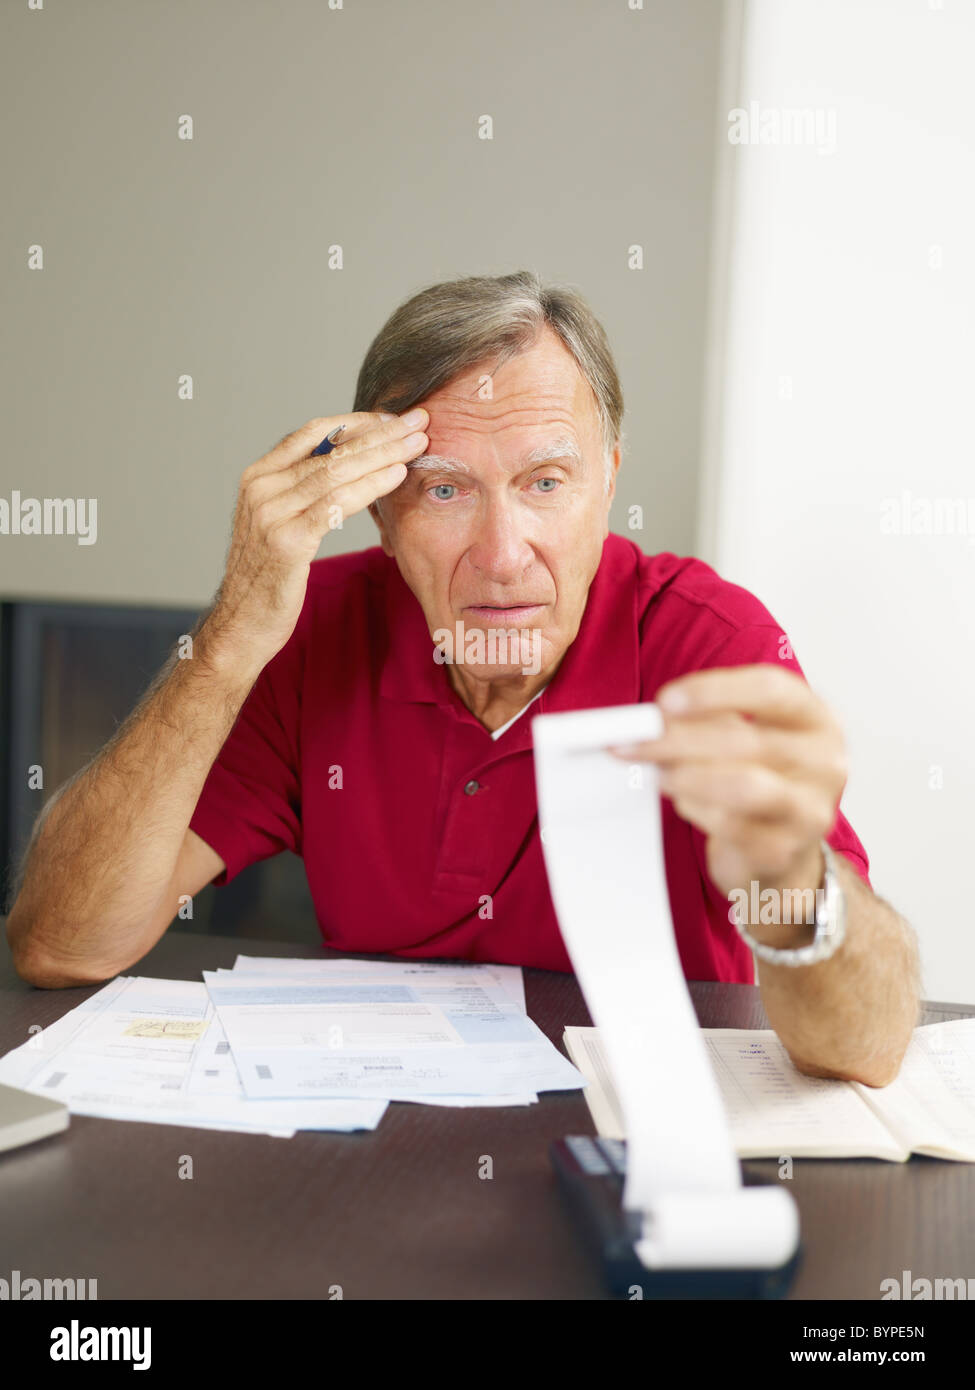 Senior man worried about his home finances. Stock Photo